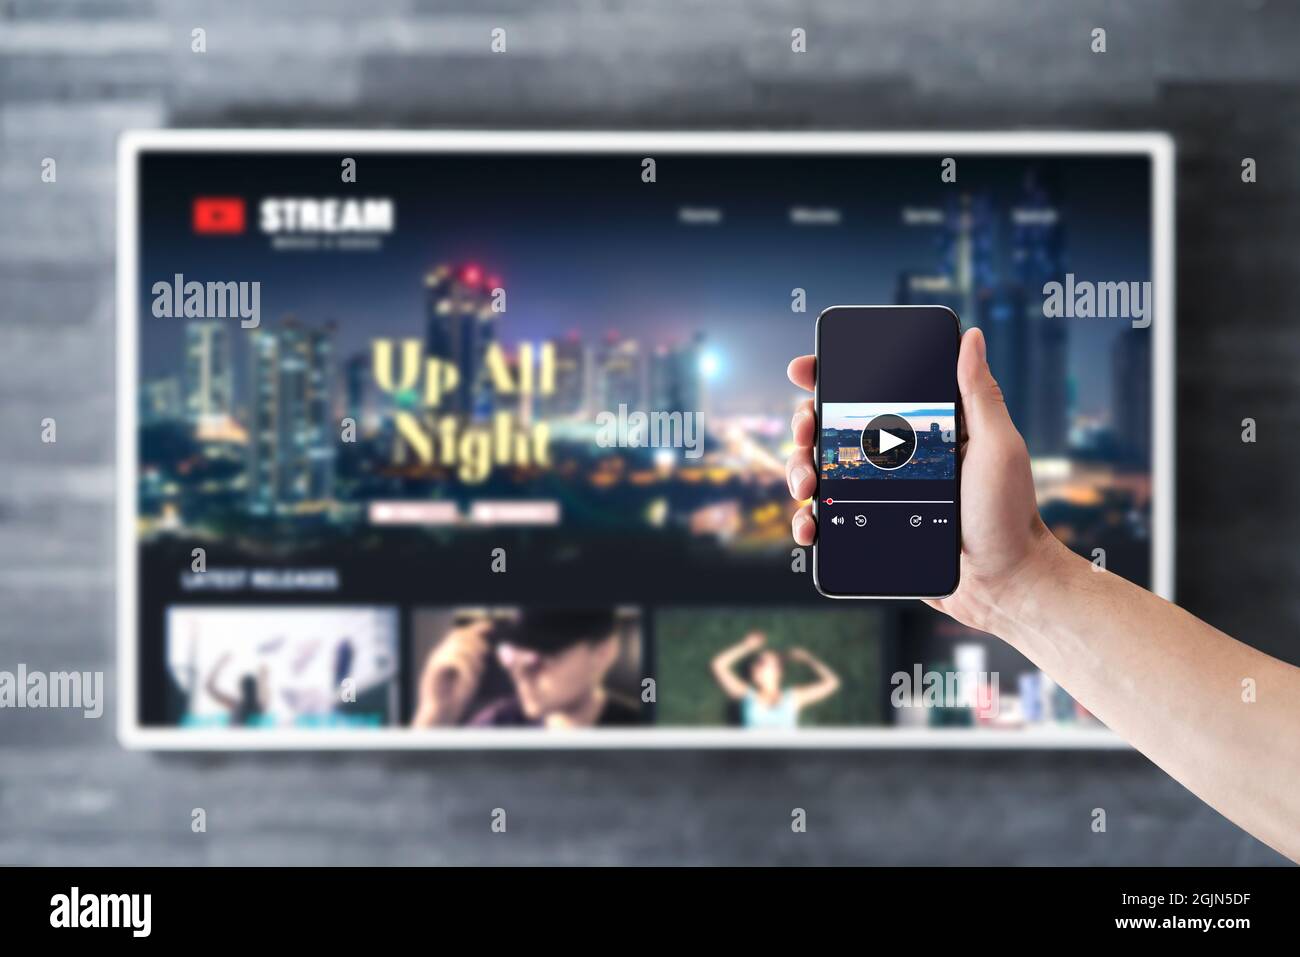 Movie stream with tv and phone. Watching on demand (VOD) series mockup with  smart television and cellphone. Man using remote control video player app  Stock Photo - Alamy